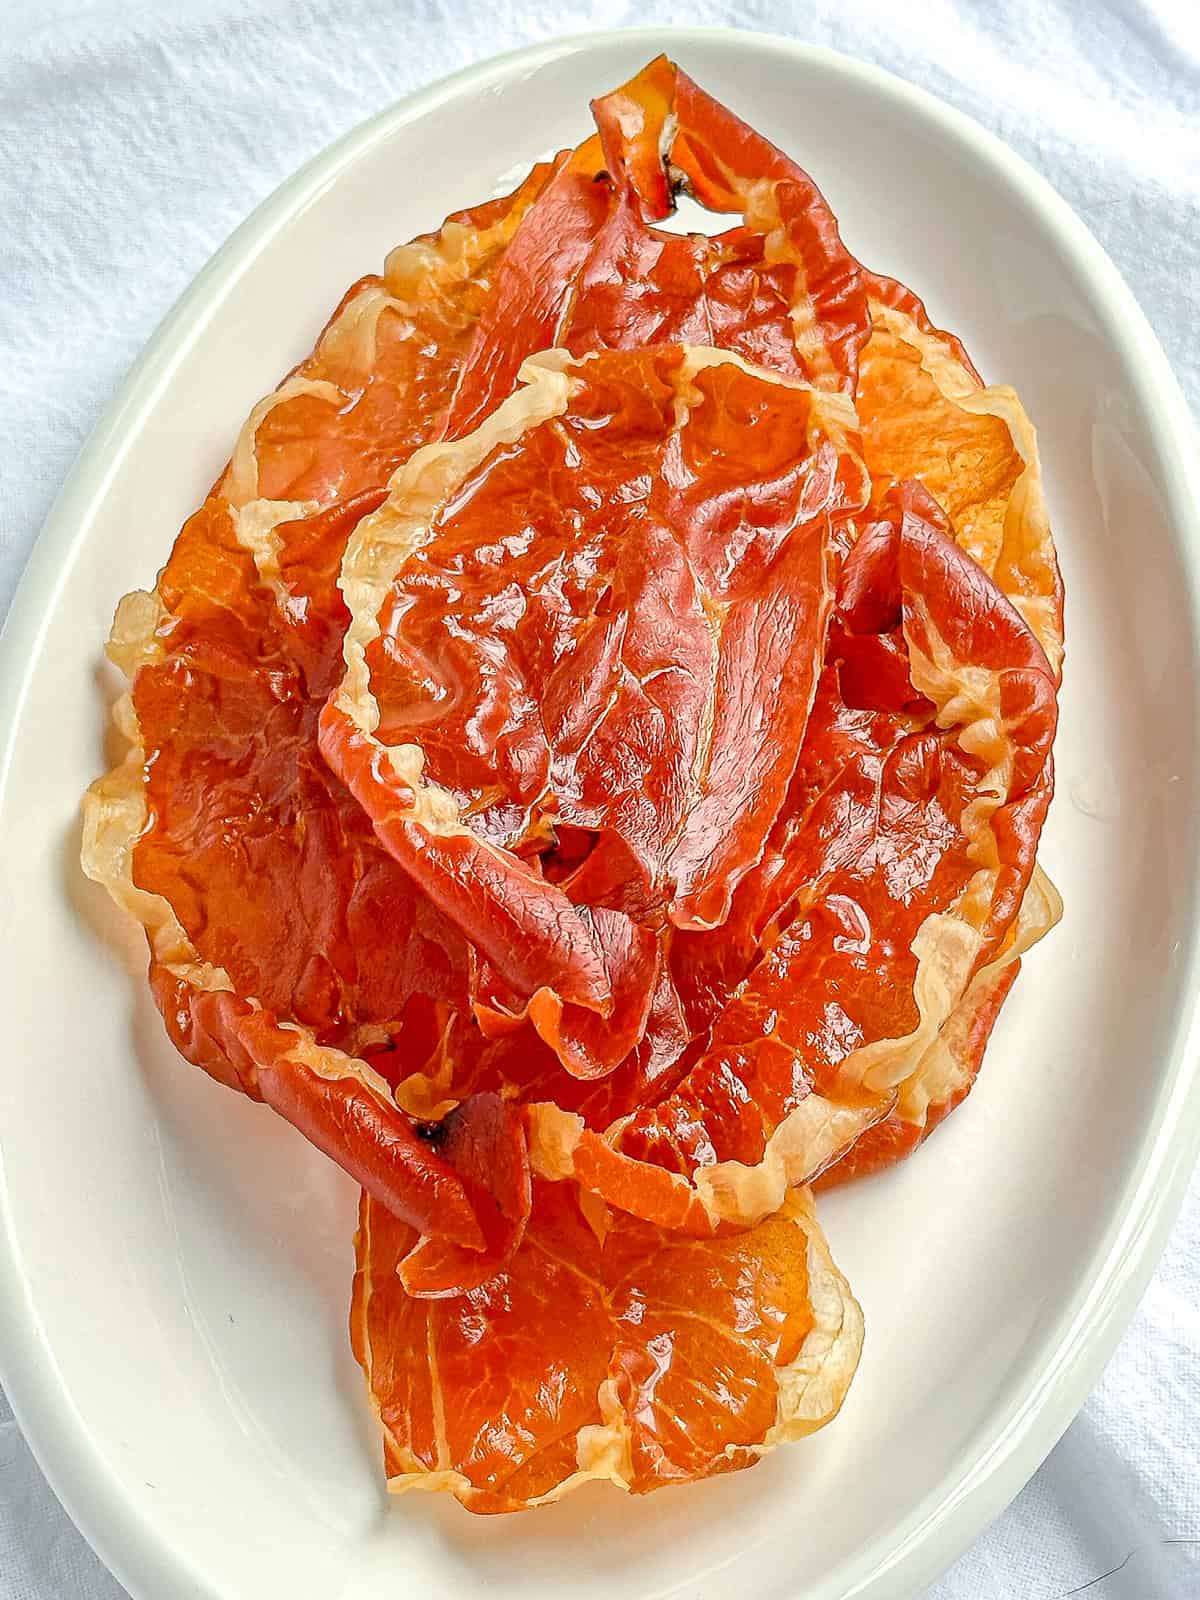 Oval white platter with pieces of crispy prosciutto.